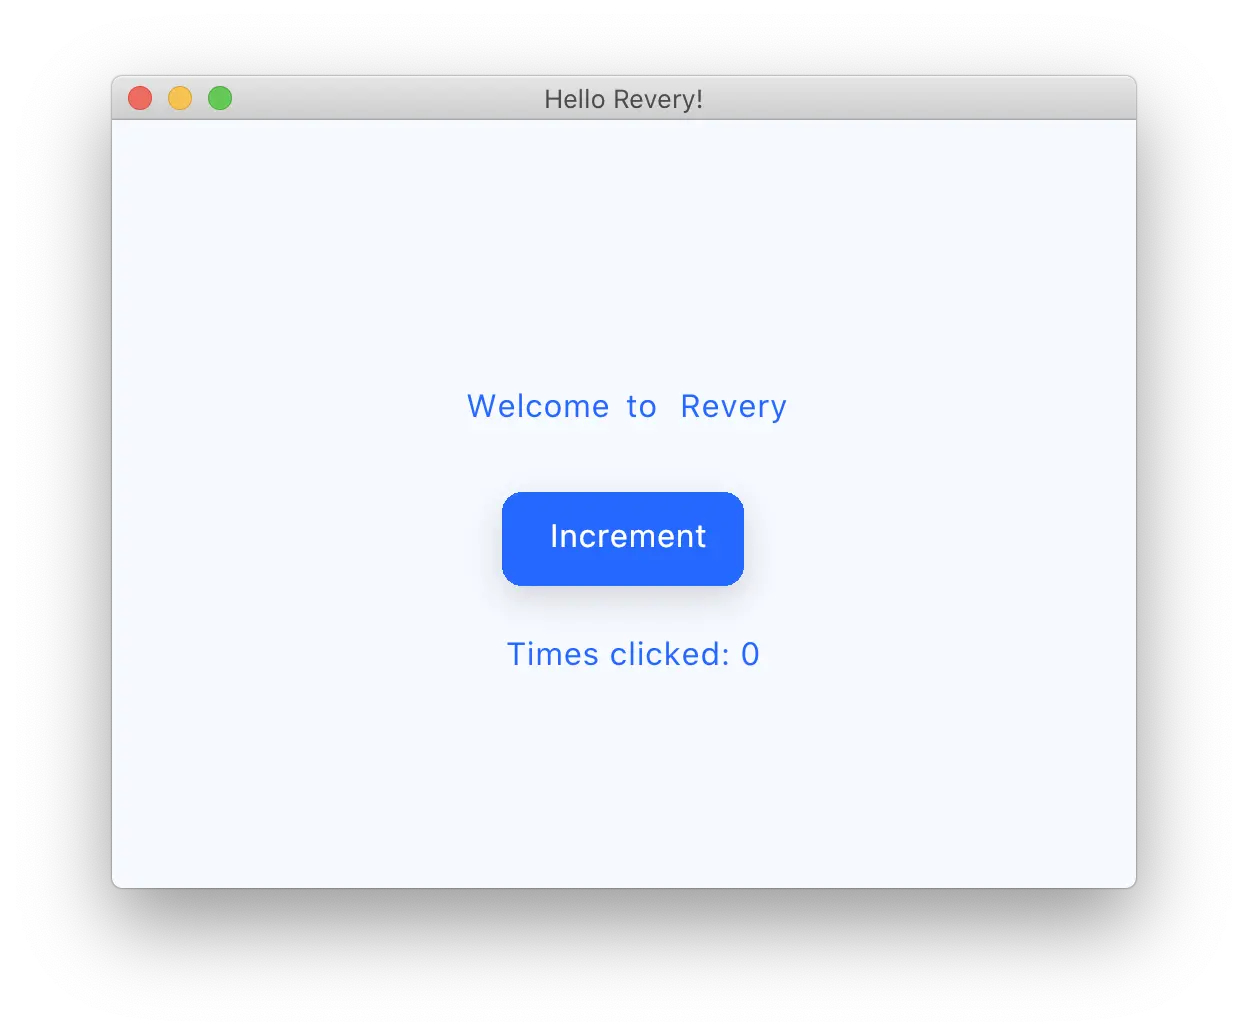 The default quick start app for the Revery GUI framework. Displays a window with 3 elements in the center. First element is text that says "Welcome to Revery". Second element is a button that says "Increment". Third element is text that says "Times clicked: 0", and is intended to show the number of times the button has been clicked.